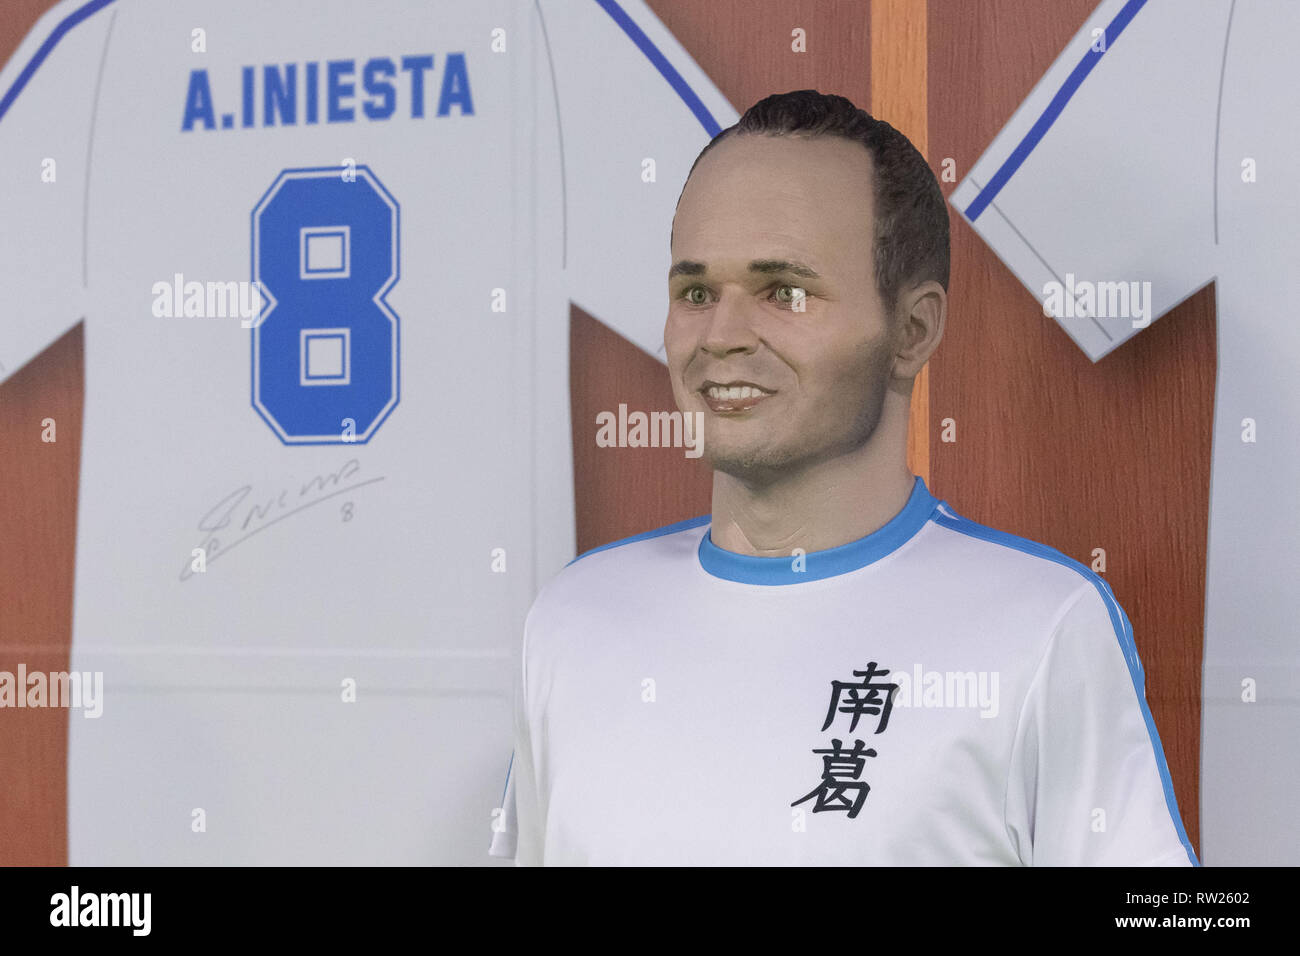 Tokyo, Japan. 4th Mar, 2019. A statue of Barcelona legend playmaker Andres Iniesta on display at Yotsugi Station. Iniesta was named Official Collaborator for the Yotsugi Station and Captain Tsubasa project, which aims to promote the tourism in the ward of Katsushika, the hometown of Yoichi Takahashi author of the Captain Tsubasa manga. Iniesta who is playing for the Japanese football club Vissel Kobe also visited the Yotsugi Station to see Captain Tsubasa manga characters decorating the interior of the train station. Credit: Rodrigo Reyes Marin/ZUMA Wire/Alamy Live News Stock Photo